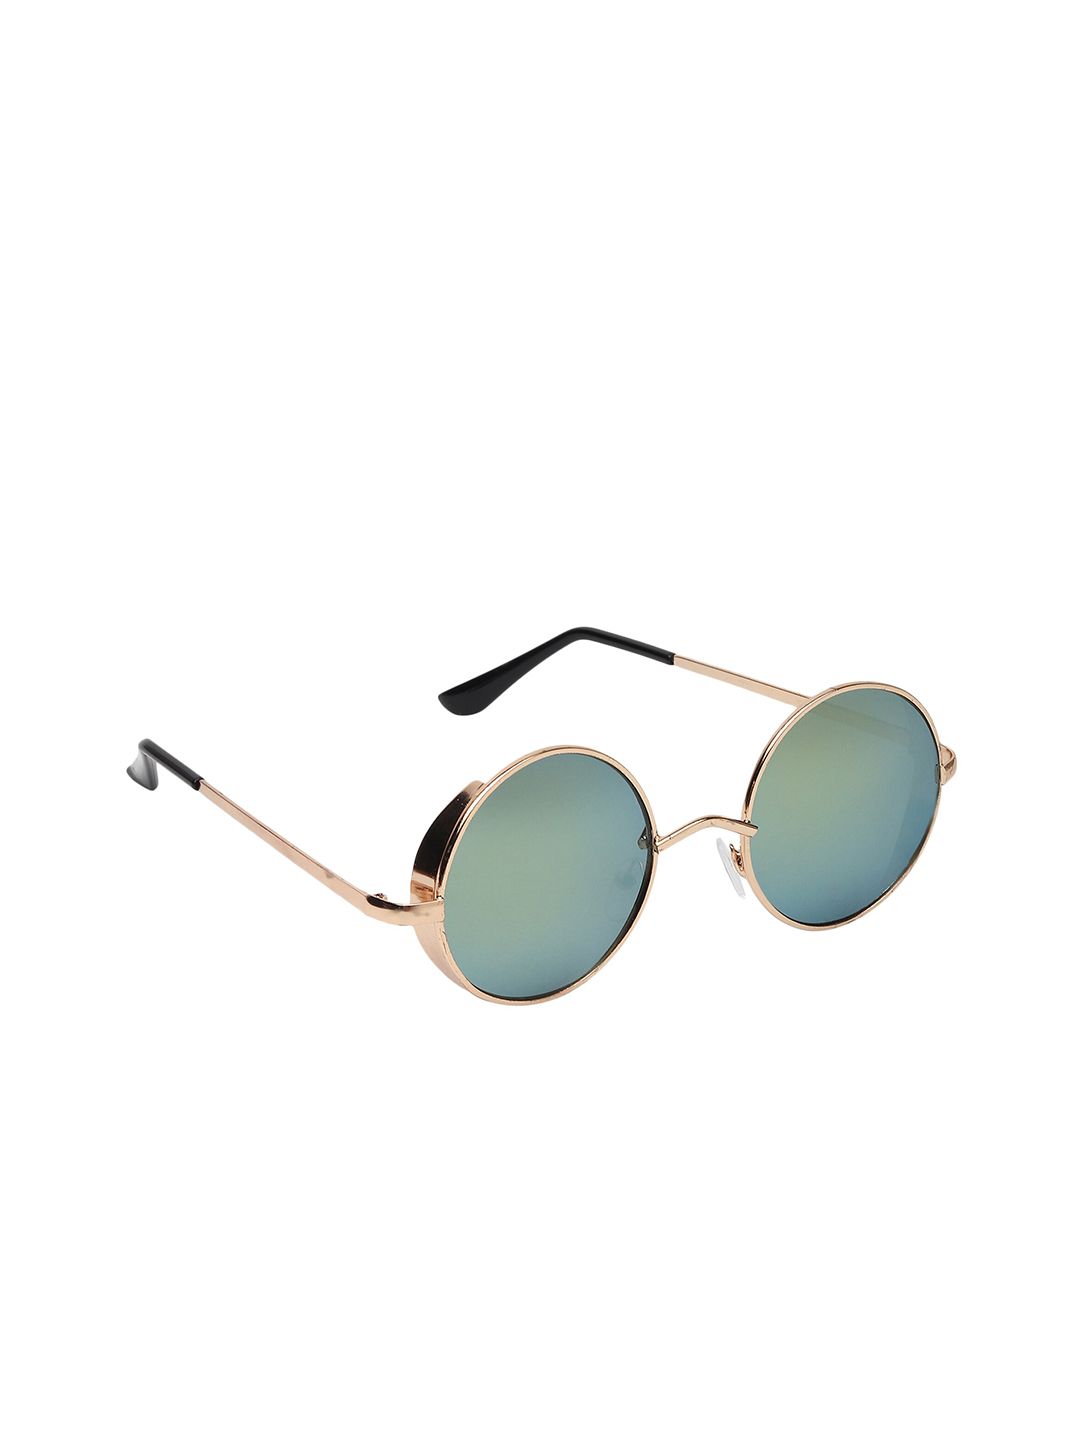 CRIBA Unisex Green Lens & Gold-Toned Round Sunglasses CR_RND_CUP GREMER Price in India